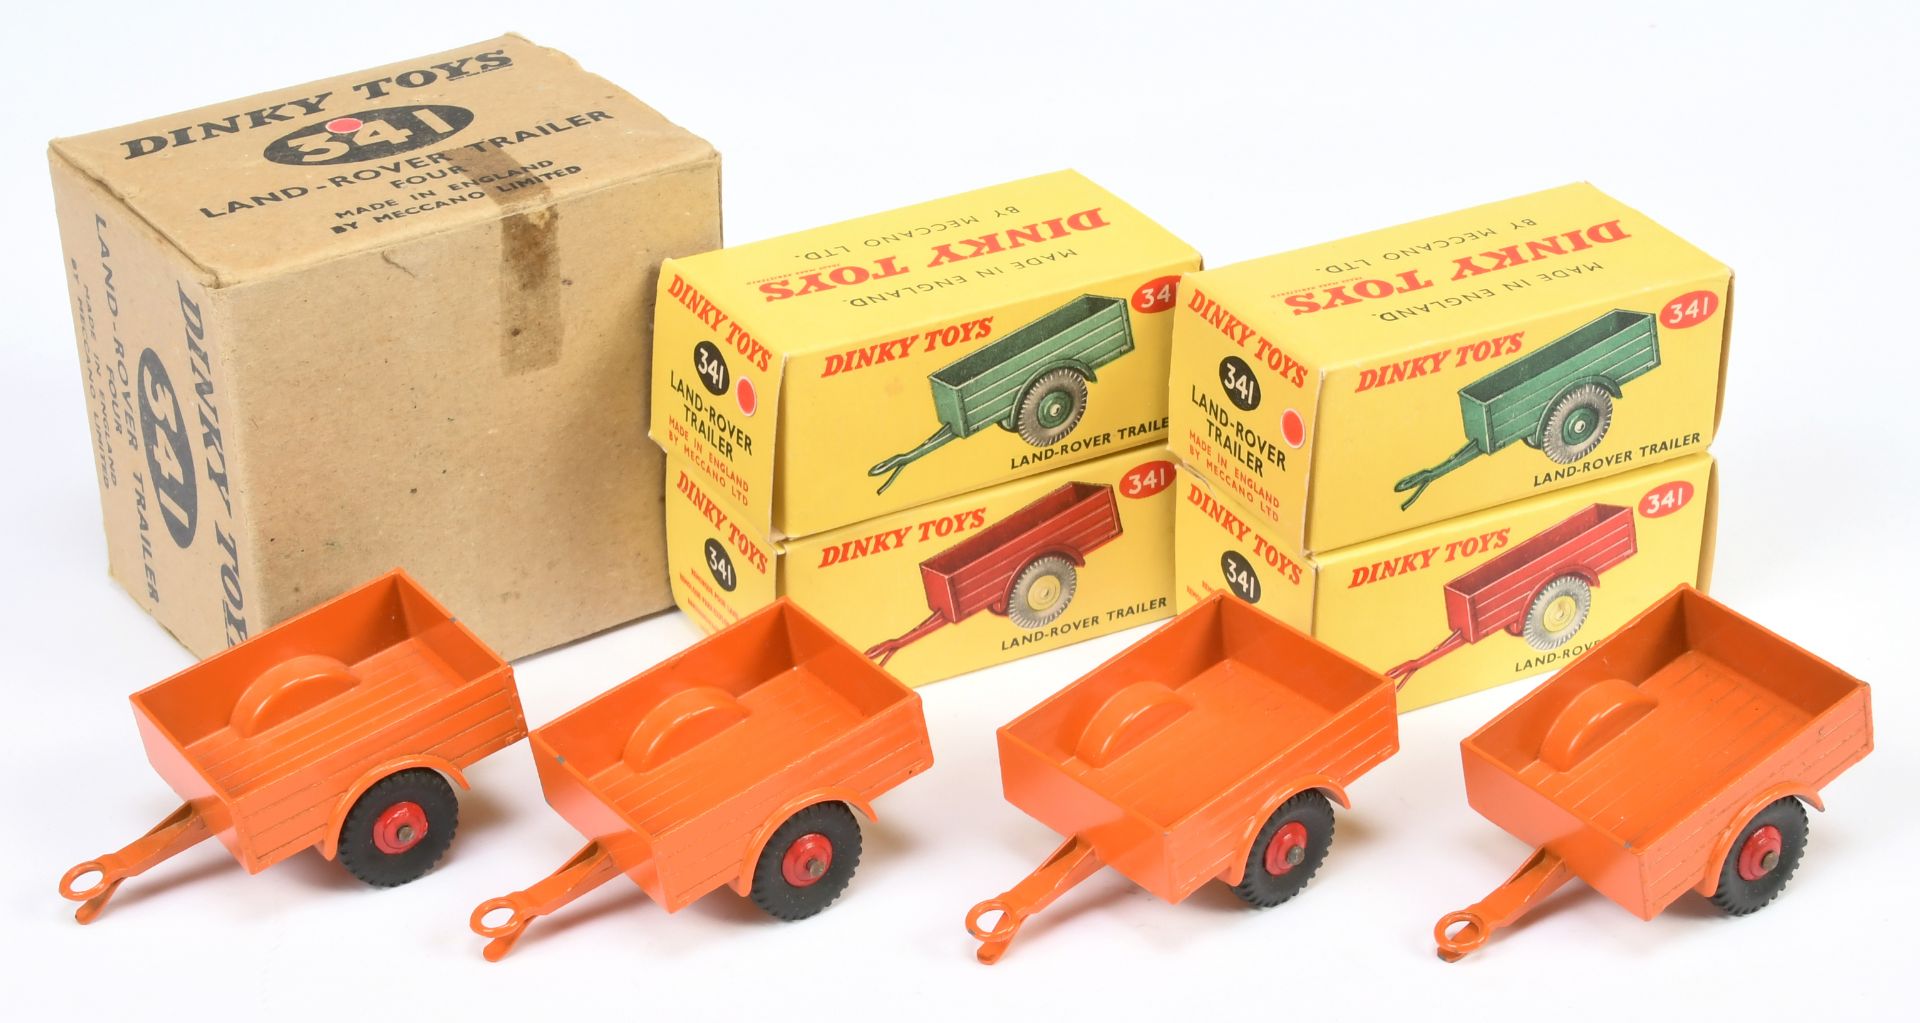 Dinky Toys Trade Pack 341 Land Rover Trailers - containing 4 examples  - Orange with red rigid hu...